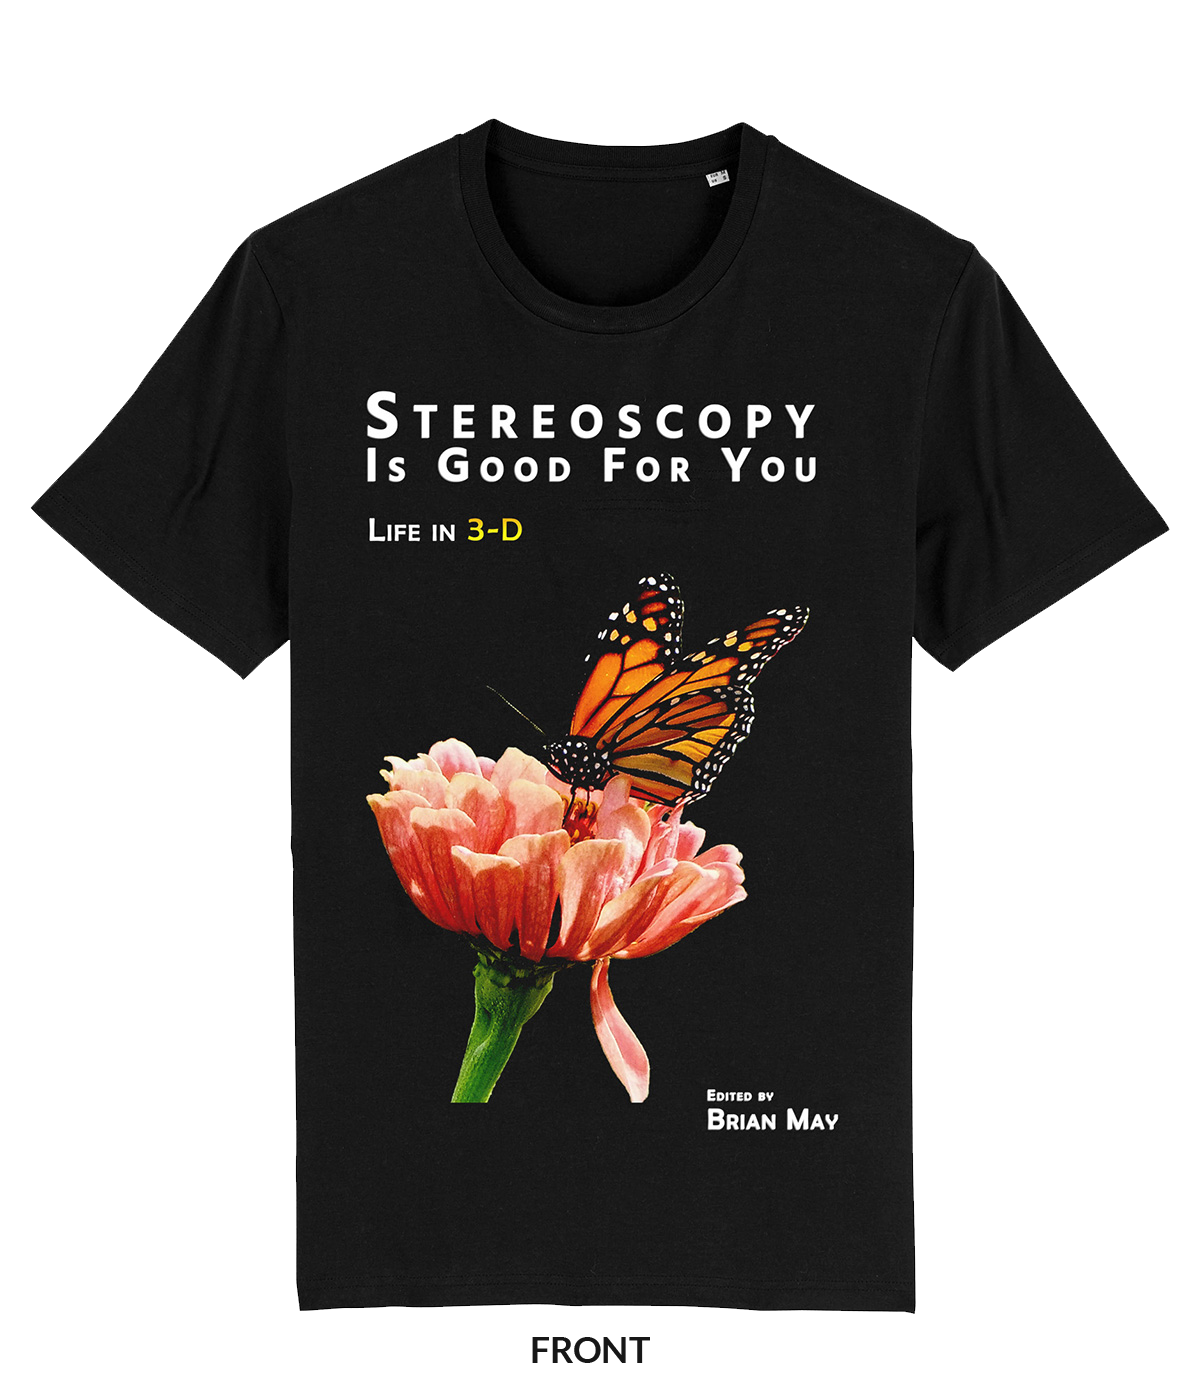 Stereoscopy Is Good For You: Life in 3-D T-Shirt [DOUBLE EXTRA LARGE]